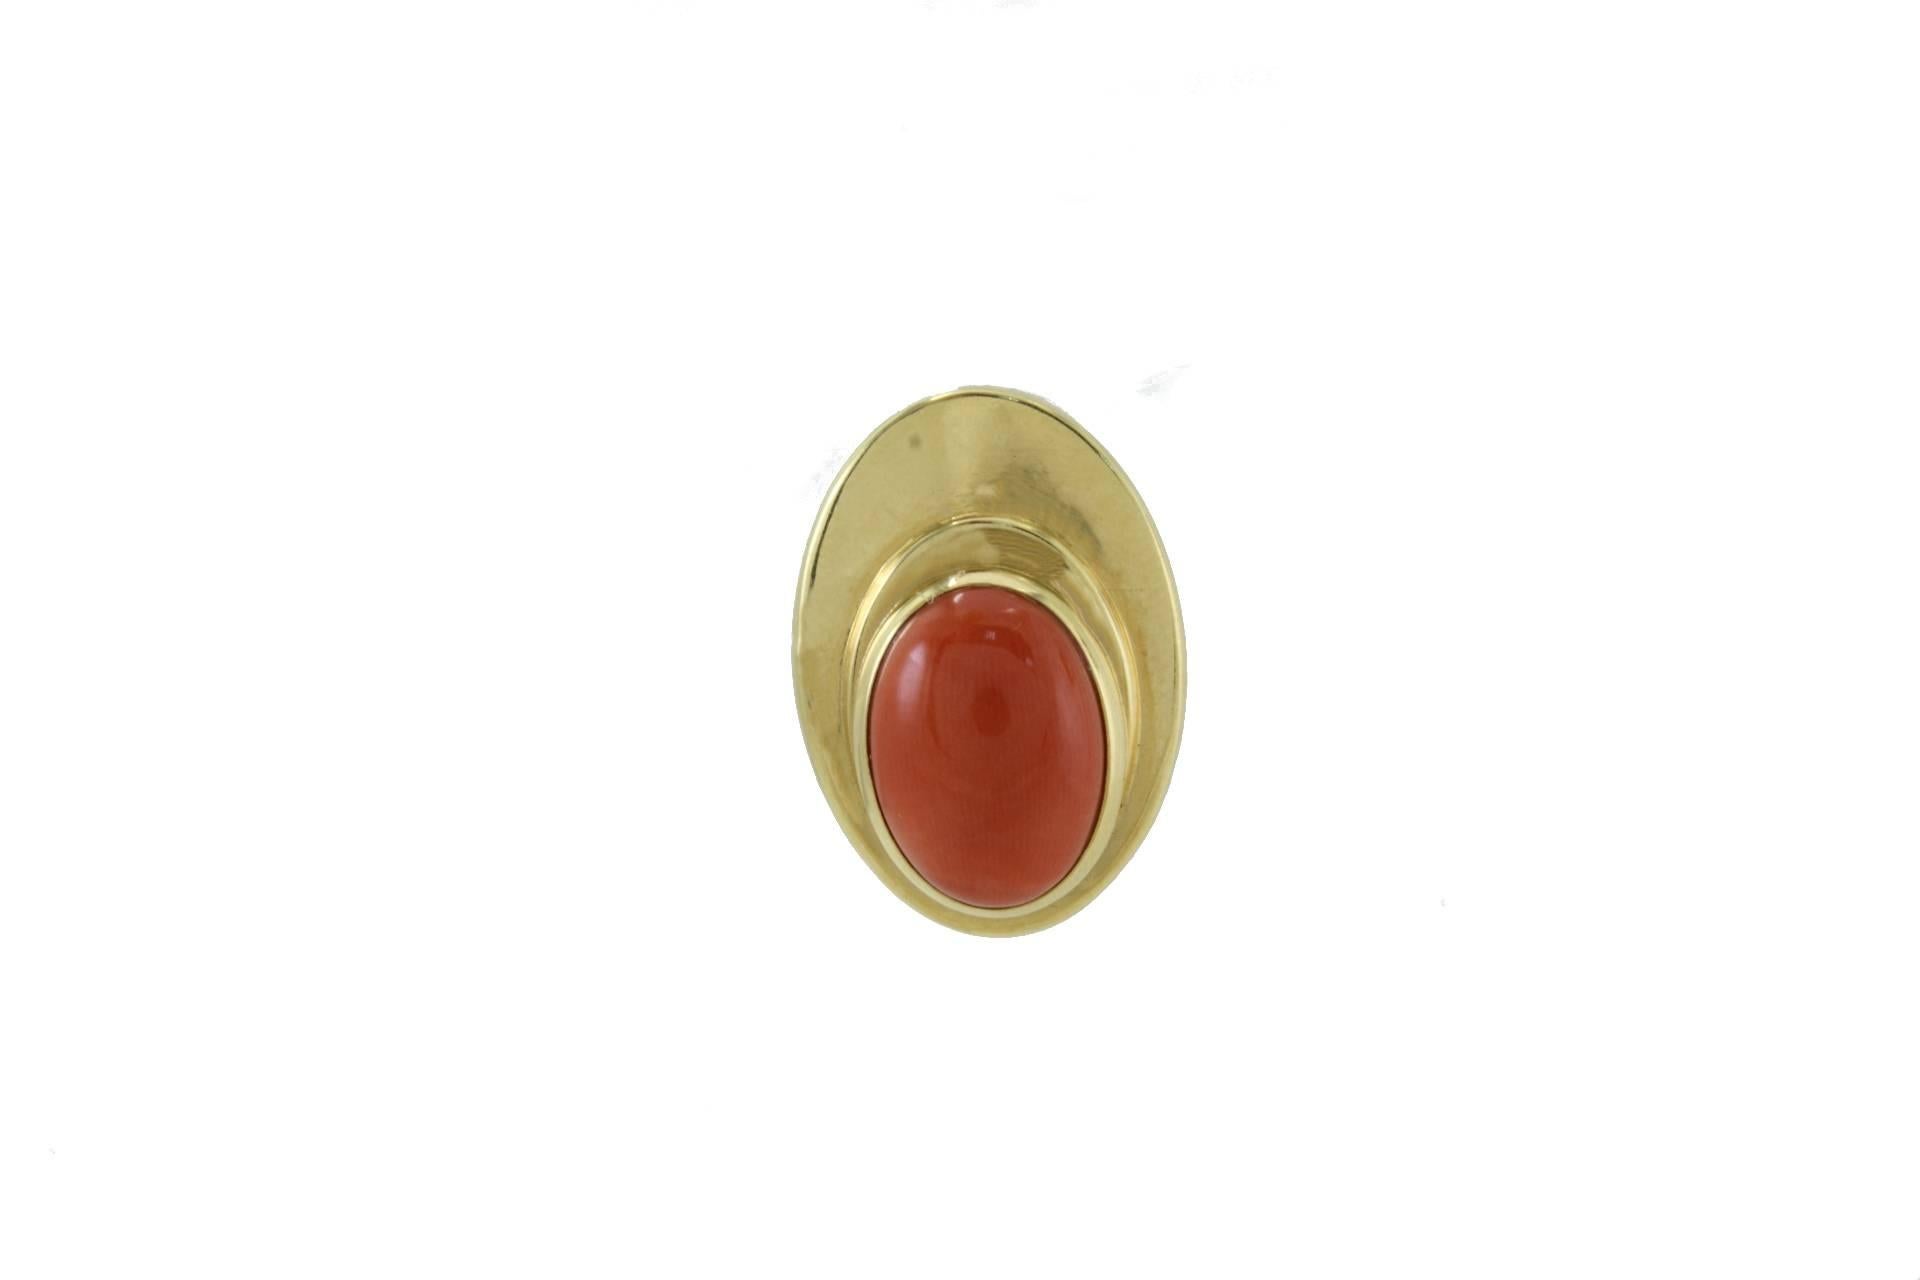 Clip-on earrings in 18k yellow gold mounted with coral.
Coral 2.50 gr
Tot.Weight 8.90 gr
R.F gcgr